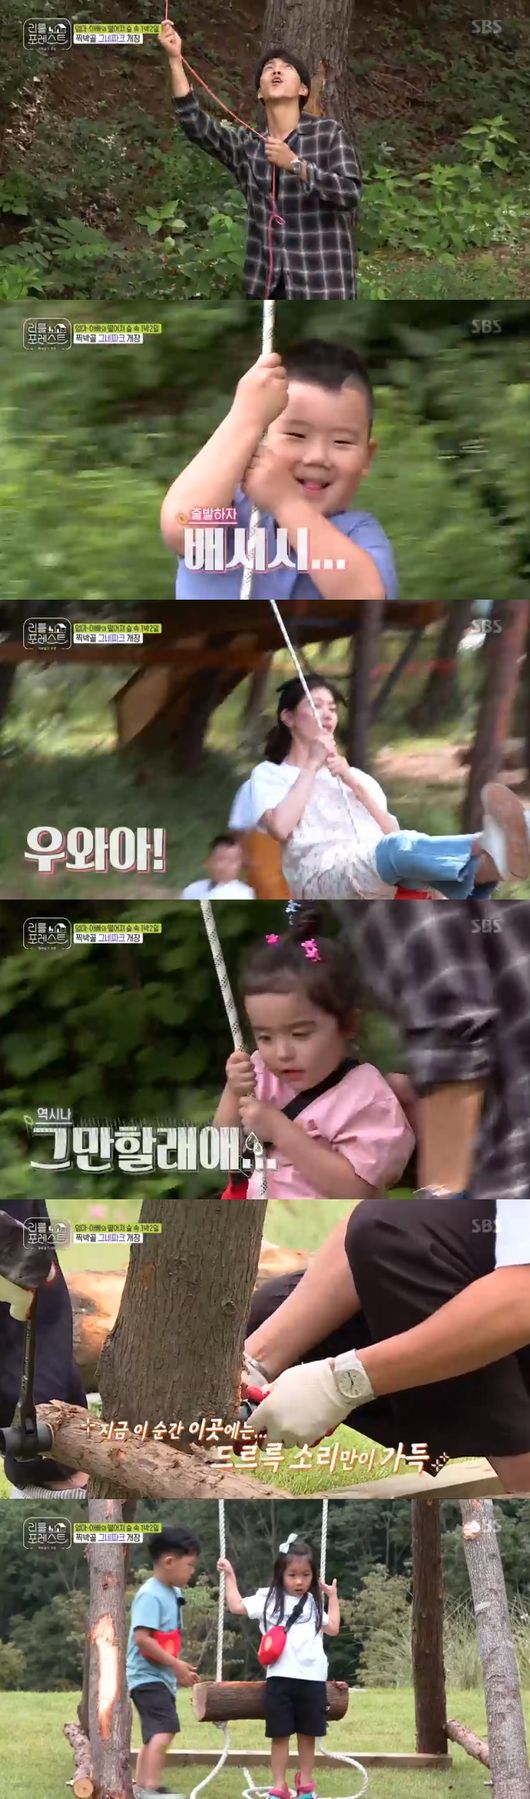 I made a swing.On the 30th SBS Wall Street Entertainment Little Forest: Summer of the Tick-Buck (hereinafter referred to as Little Forest), Lee Seung-gi x Lee Seo-jin, who made a swing for Little Lee, was portrayed.Lee Seung-gi planned to make a swing saying that he would like to enjoy a lot of things he can do in the forest, and Lee Seo-jin was worried that he was unsettled.Lee Seung-gi found a tree to make a swing with Lee Han-i, and Seung-gi wrapped a line around the stone and threw it on the tree. However, he made a mistake and Lee Han cheered for be strong.Lee Seung-gi succeeded in Lee Han-yis support, and asked Lee Han-yi, I will send Kim Jin-hee to him like that. Lee Han-yi said, Heh, I do not accept my letter.Lee Seung-gi then completed the outing swing; Lee Seung-gi was the first to board after first testing and confirming her strength before picking up the children.Lee was delighted with his smile.When Jung So-min came to see the news that the swing was completed, he boarded for the second time. Jung So-min also enjoyed the thrill, saying, Its so funny.Little ones swinged one after another, but the children were scared, and Lee Seung-gi was riding, and Lee Seo-jin said, The outer line is too scary for the children.I went into making a two-line swing.Lee Seo-jin looked at the swing he made and said, Kim Jing-hee and Yunas Date place.Two little boys enjoyed their time enjoying Date.Little Forest broadcast screen capture